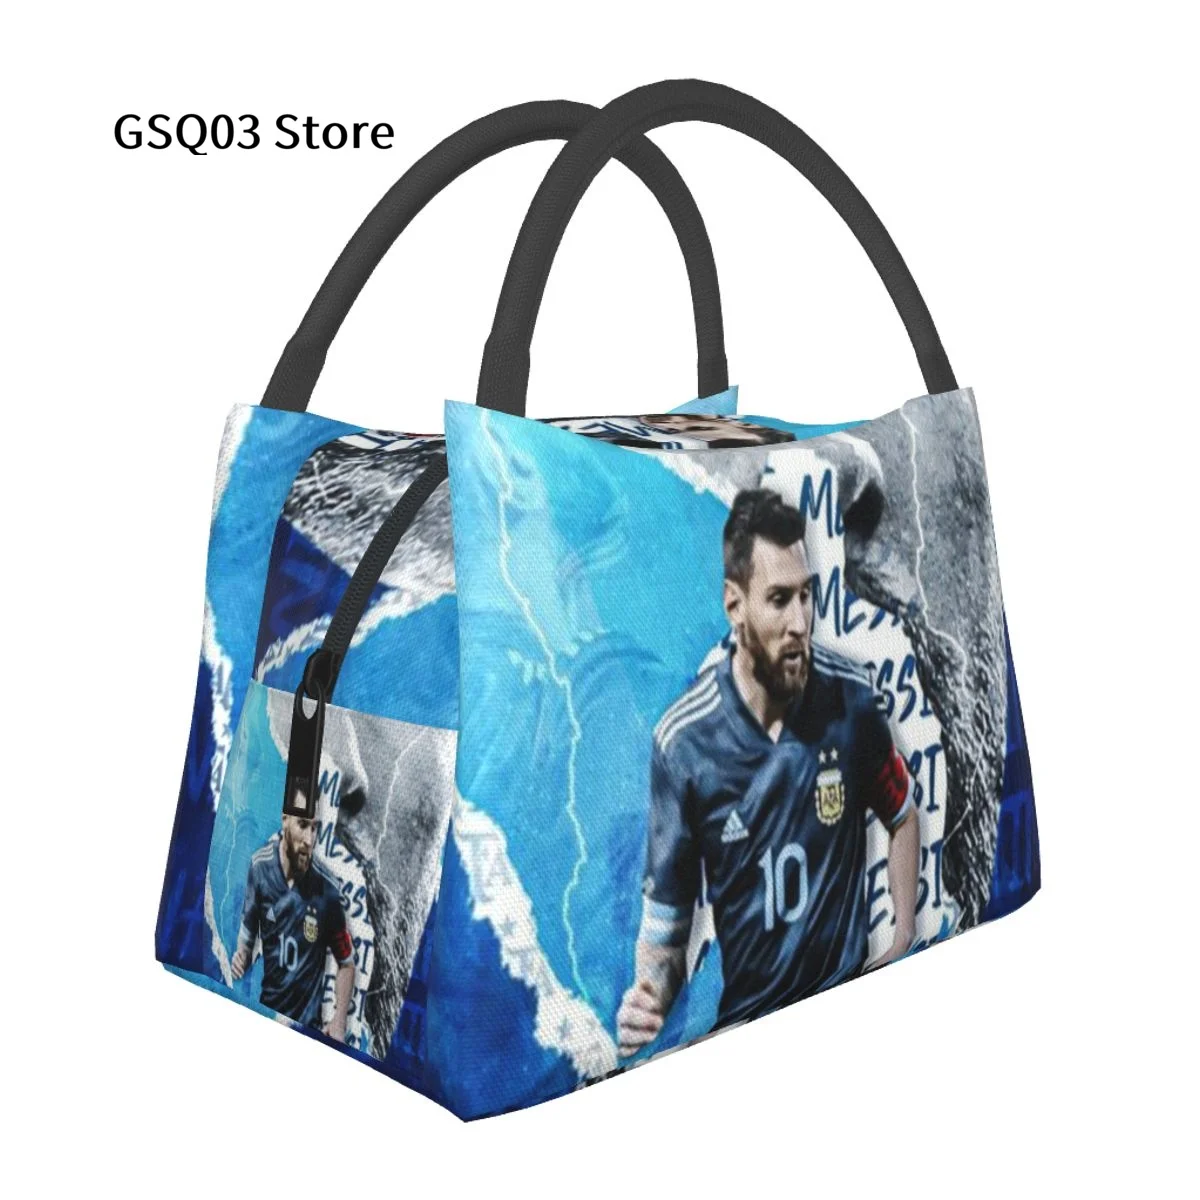 

Football Star Messi Lunch Box Reusable Tote Bag, Cooler Waterproof Lunch Bag Container For Work Office Travel Picnic